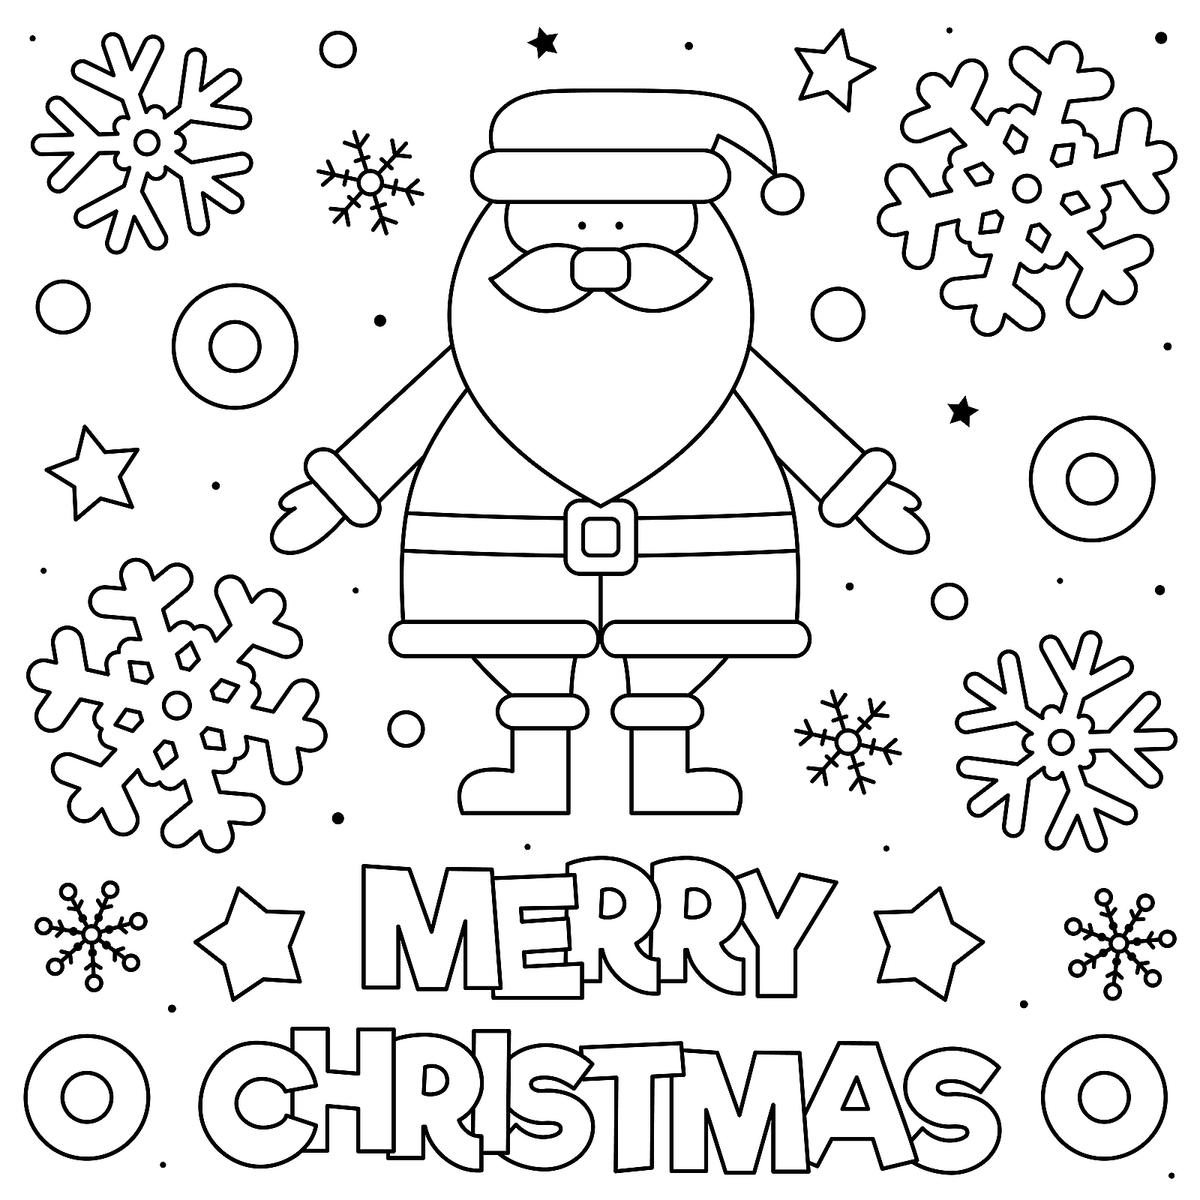 Santa claus coloring pages free coloring pages of jolly old st nick for christmas fun holidays mom